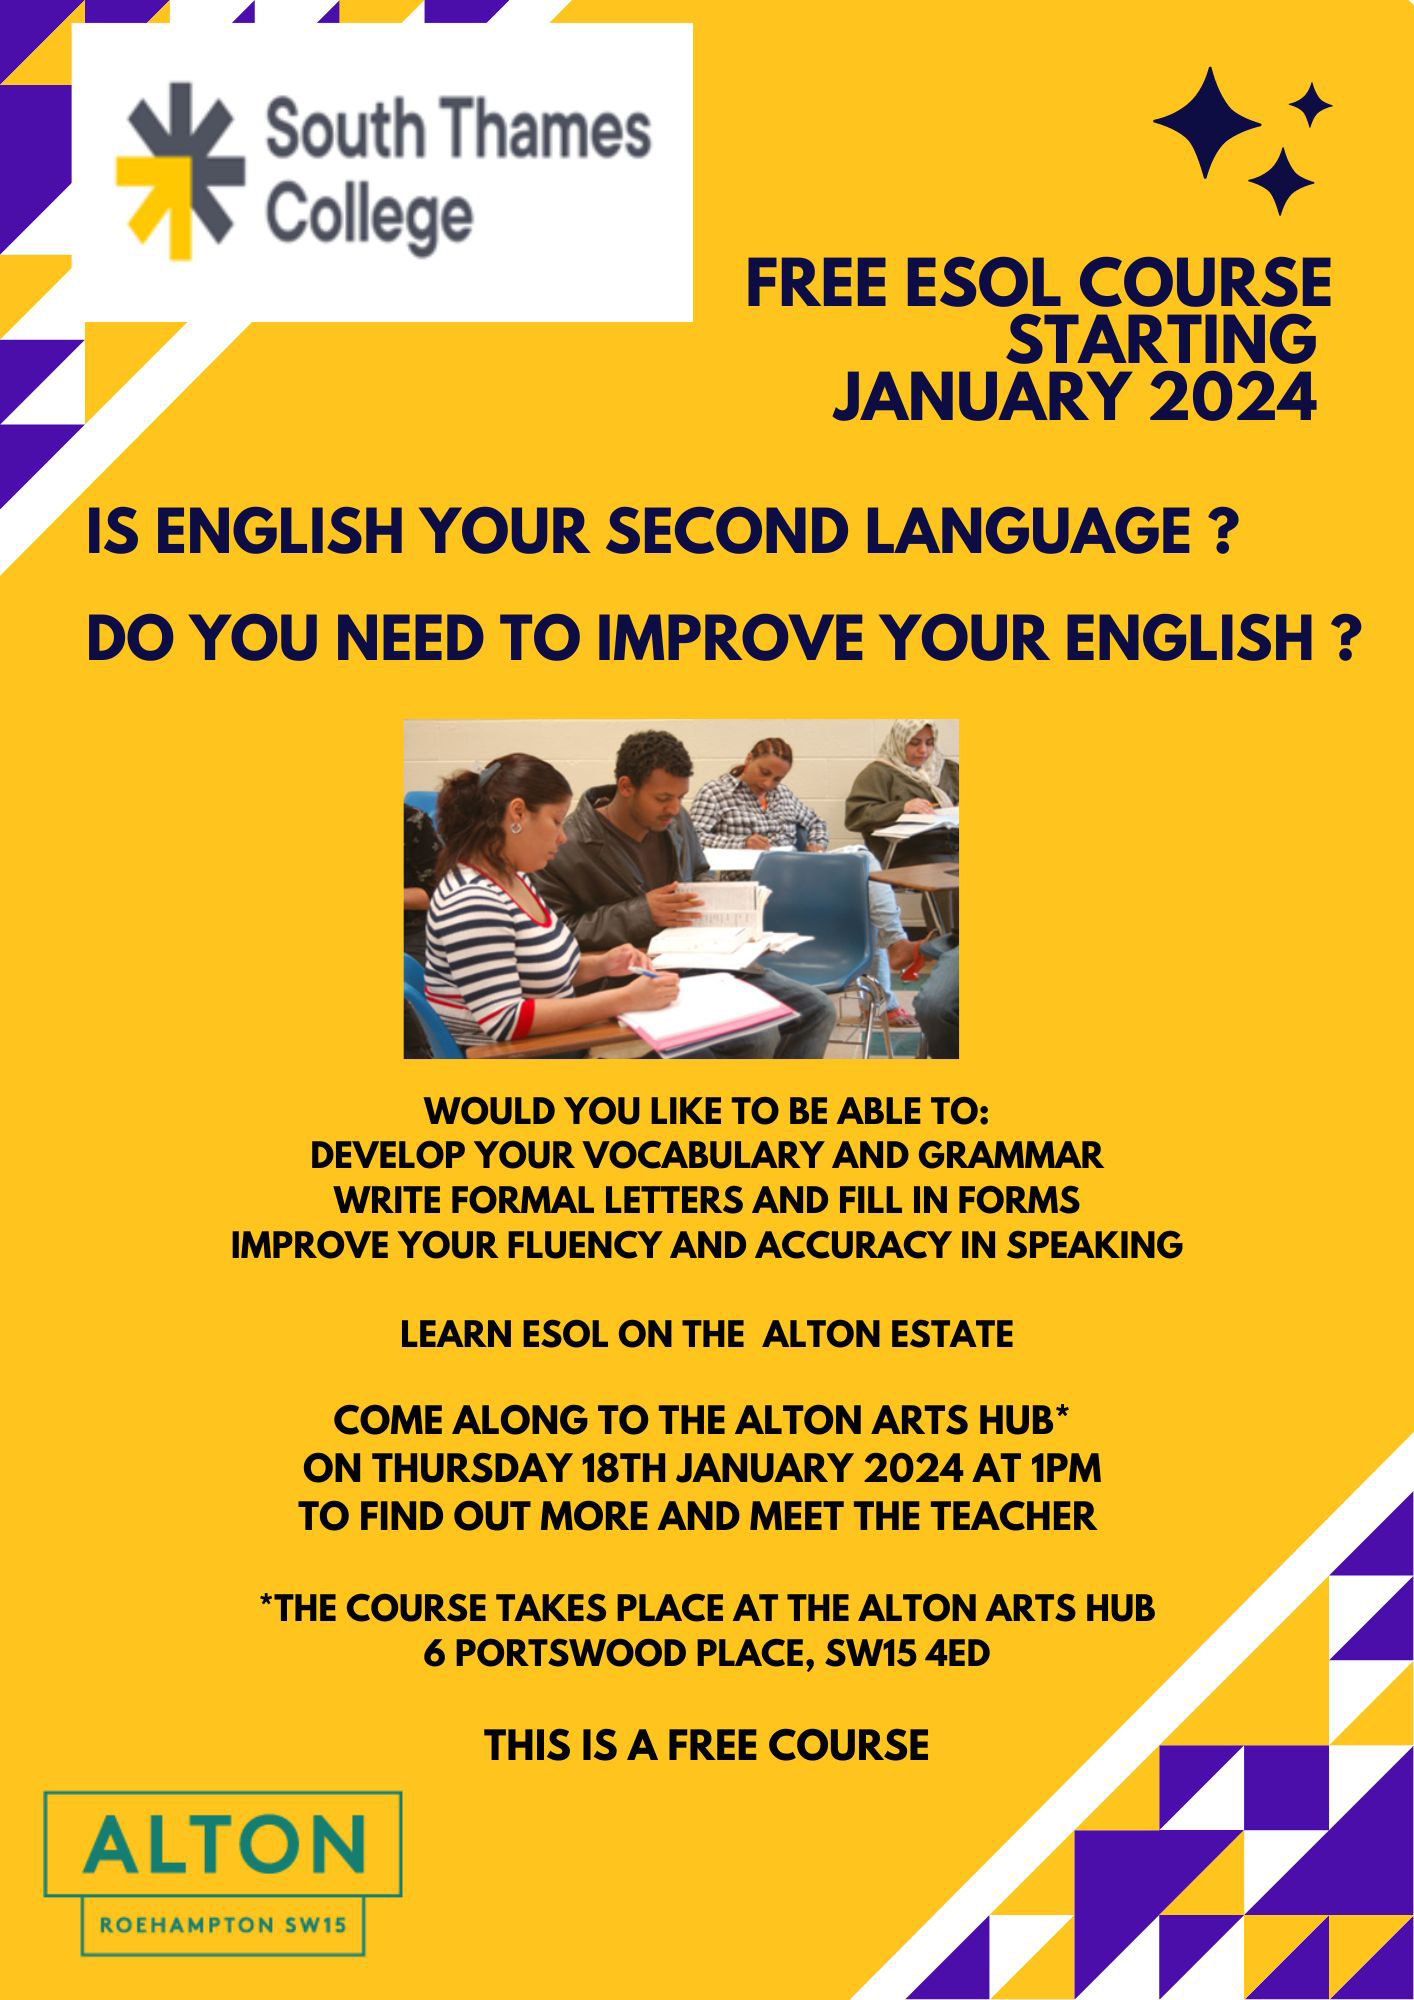 Poster advertising free ESOL course which starts in January 2024